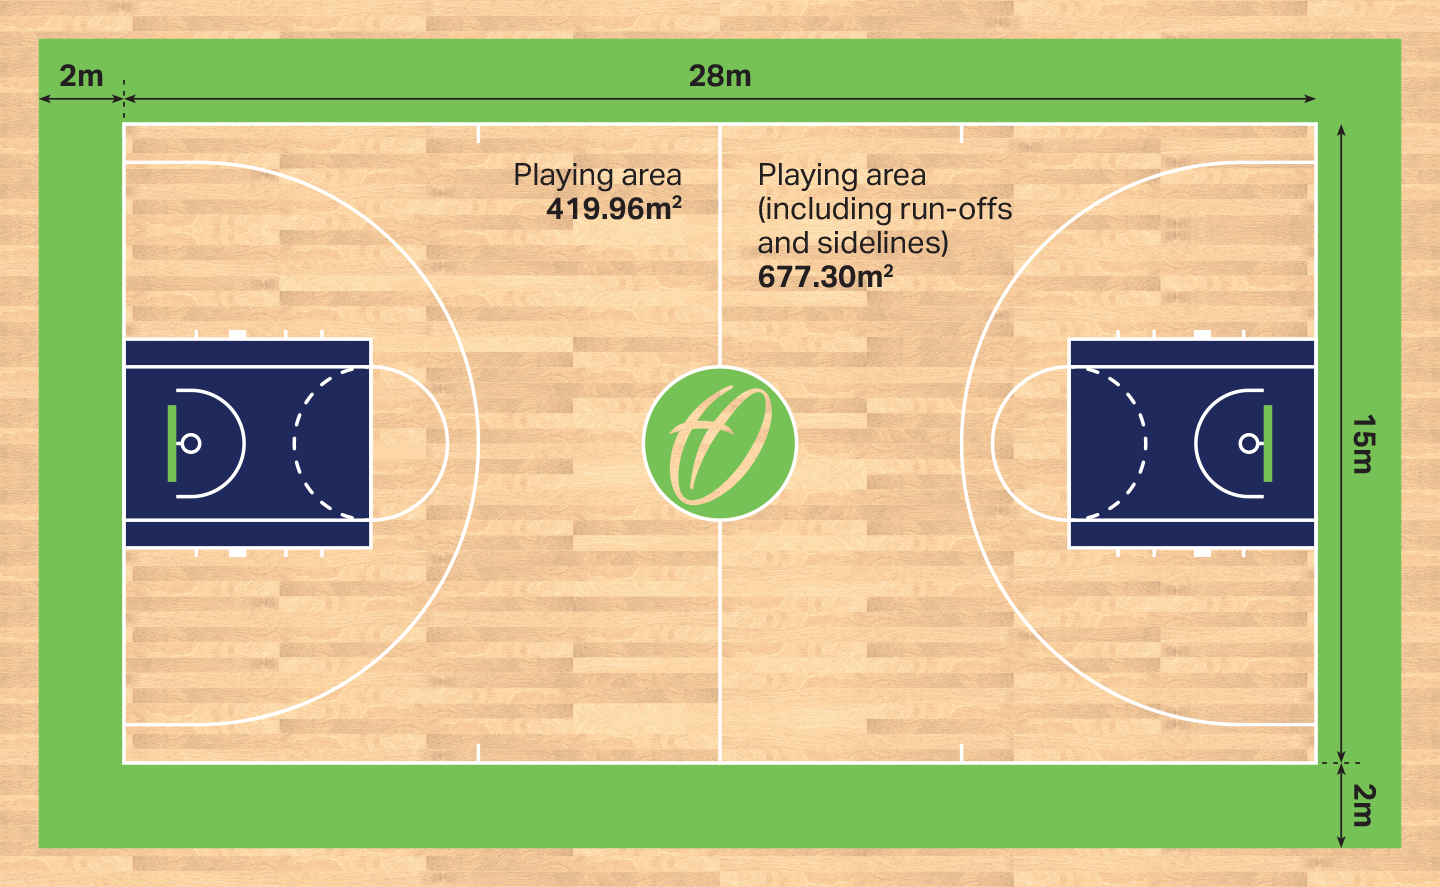 Basketball Court Dimensions & Markings - Basketball Court Dimensions In Metres